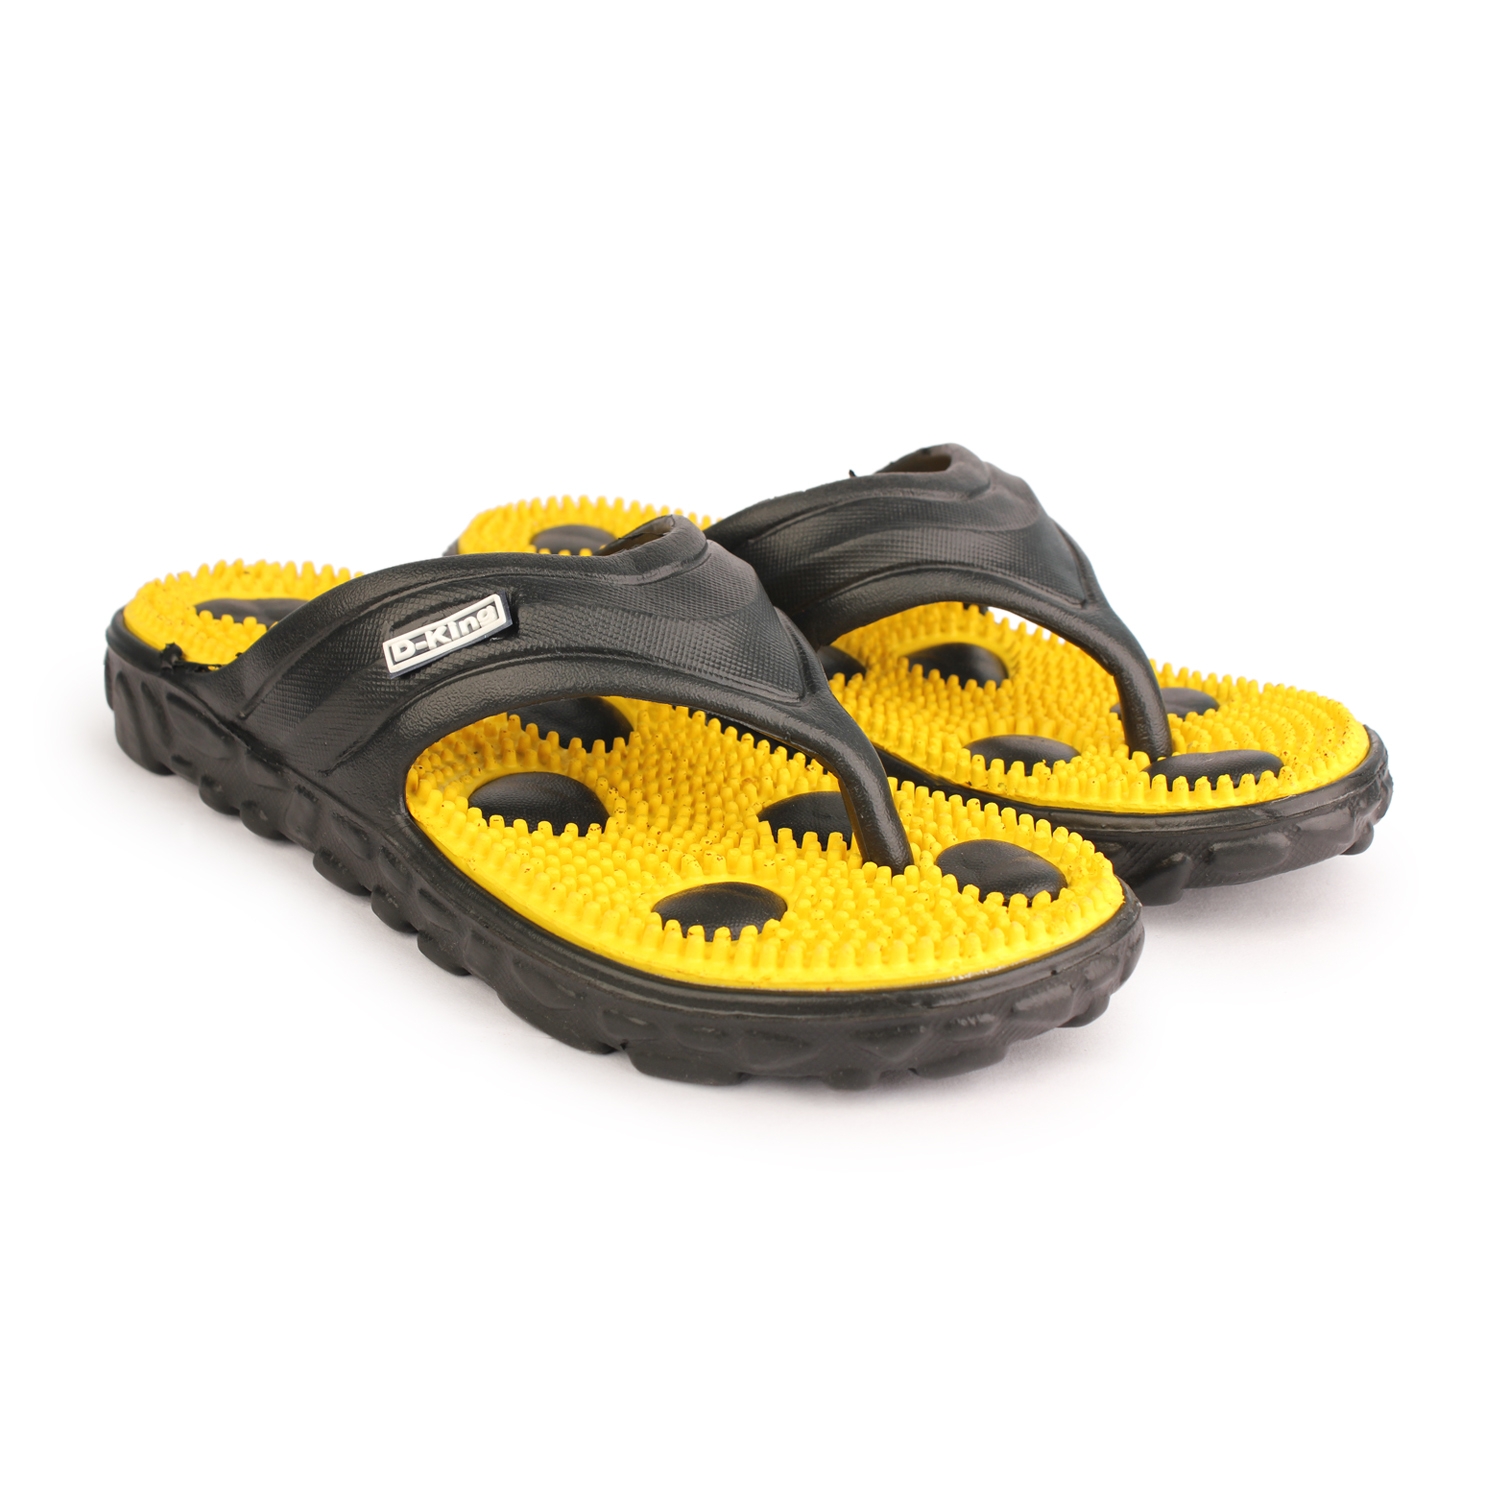 Buy Spring Acupressure and Magnetic Therapy Accu Paduka Slippers At Sehgall  - G157 | Sehgall